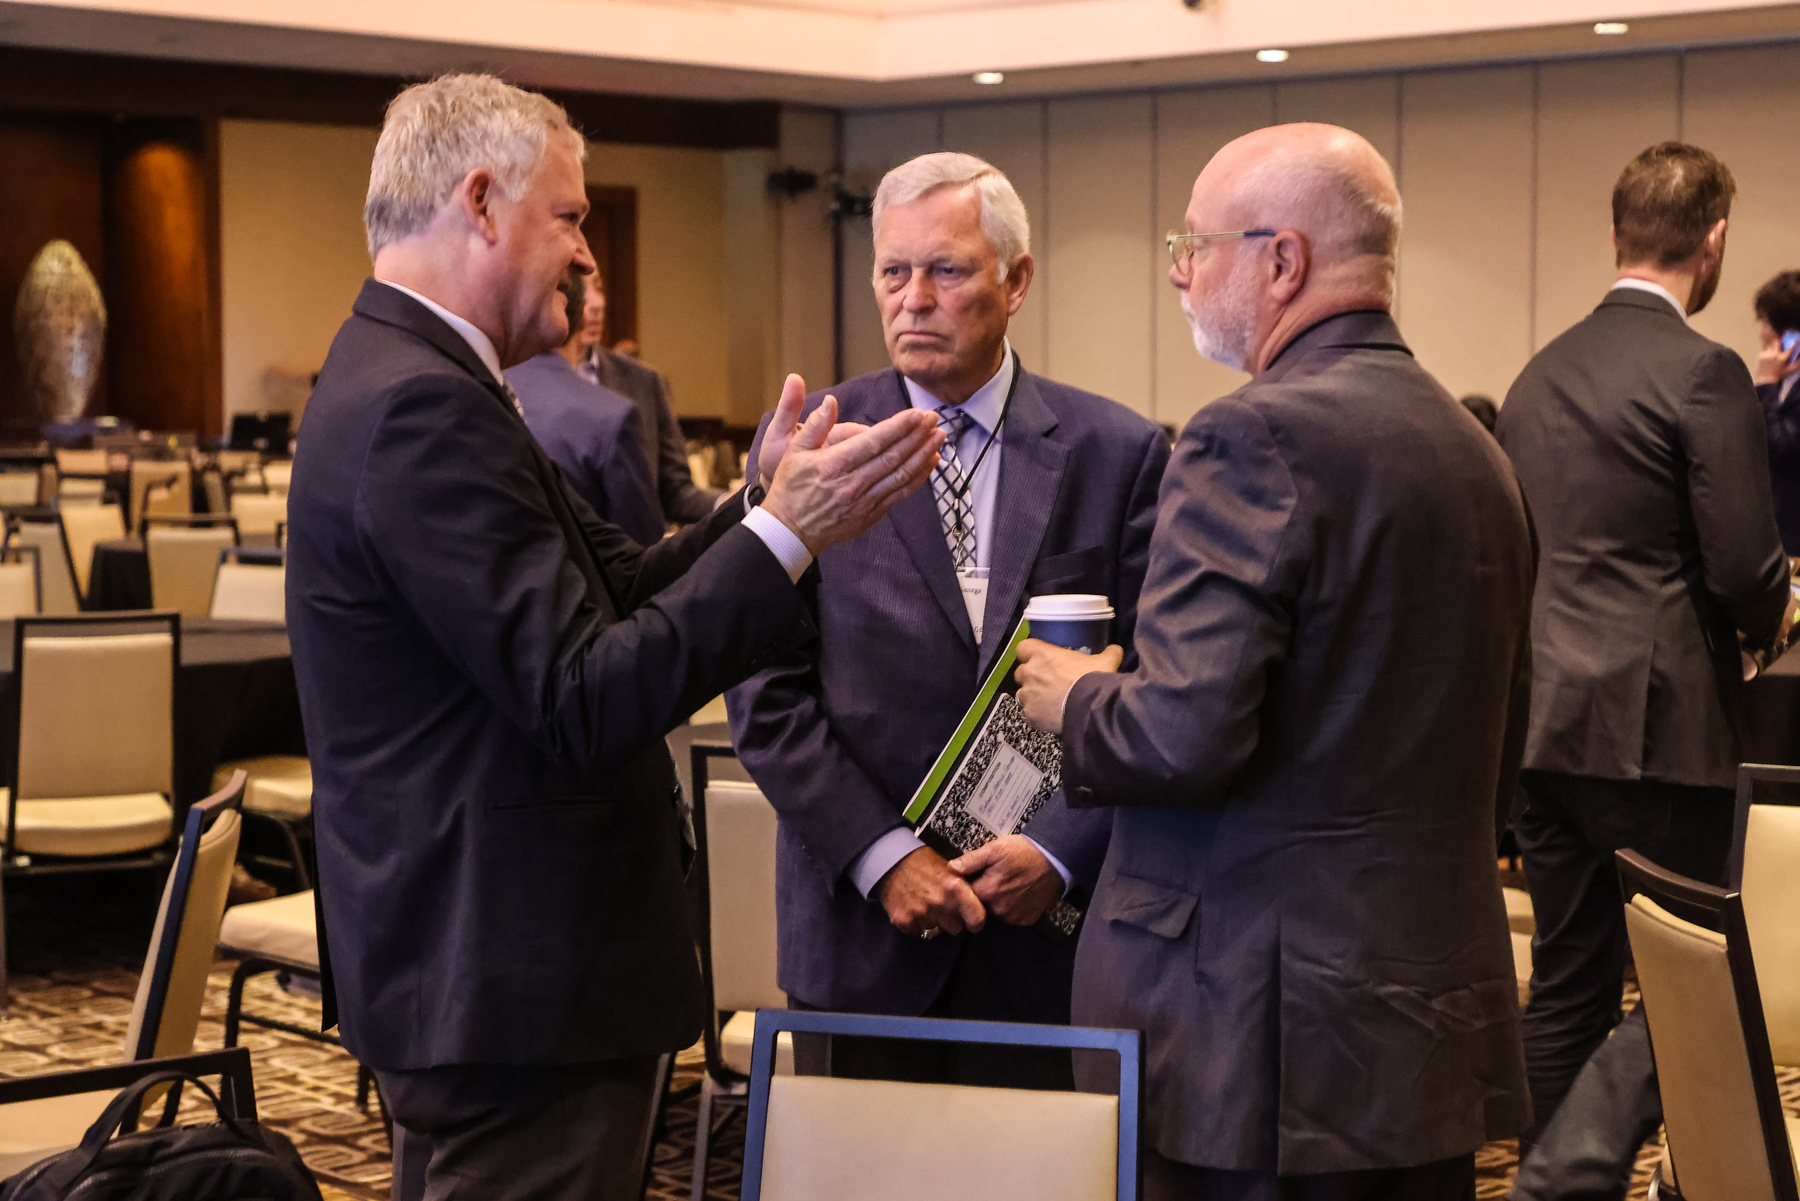 Current Delta Watermaster Jay Ziegler speaking to Former Delta Watermaster Michael George and  Southern California Water Coalition's Charley Wilso